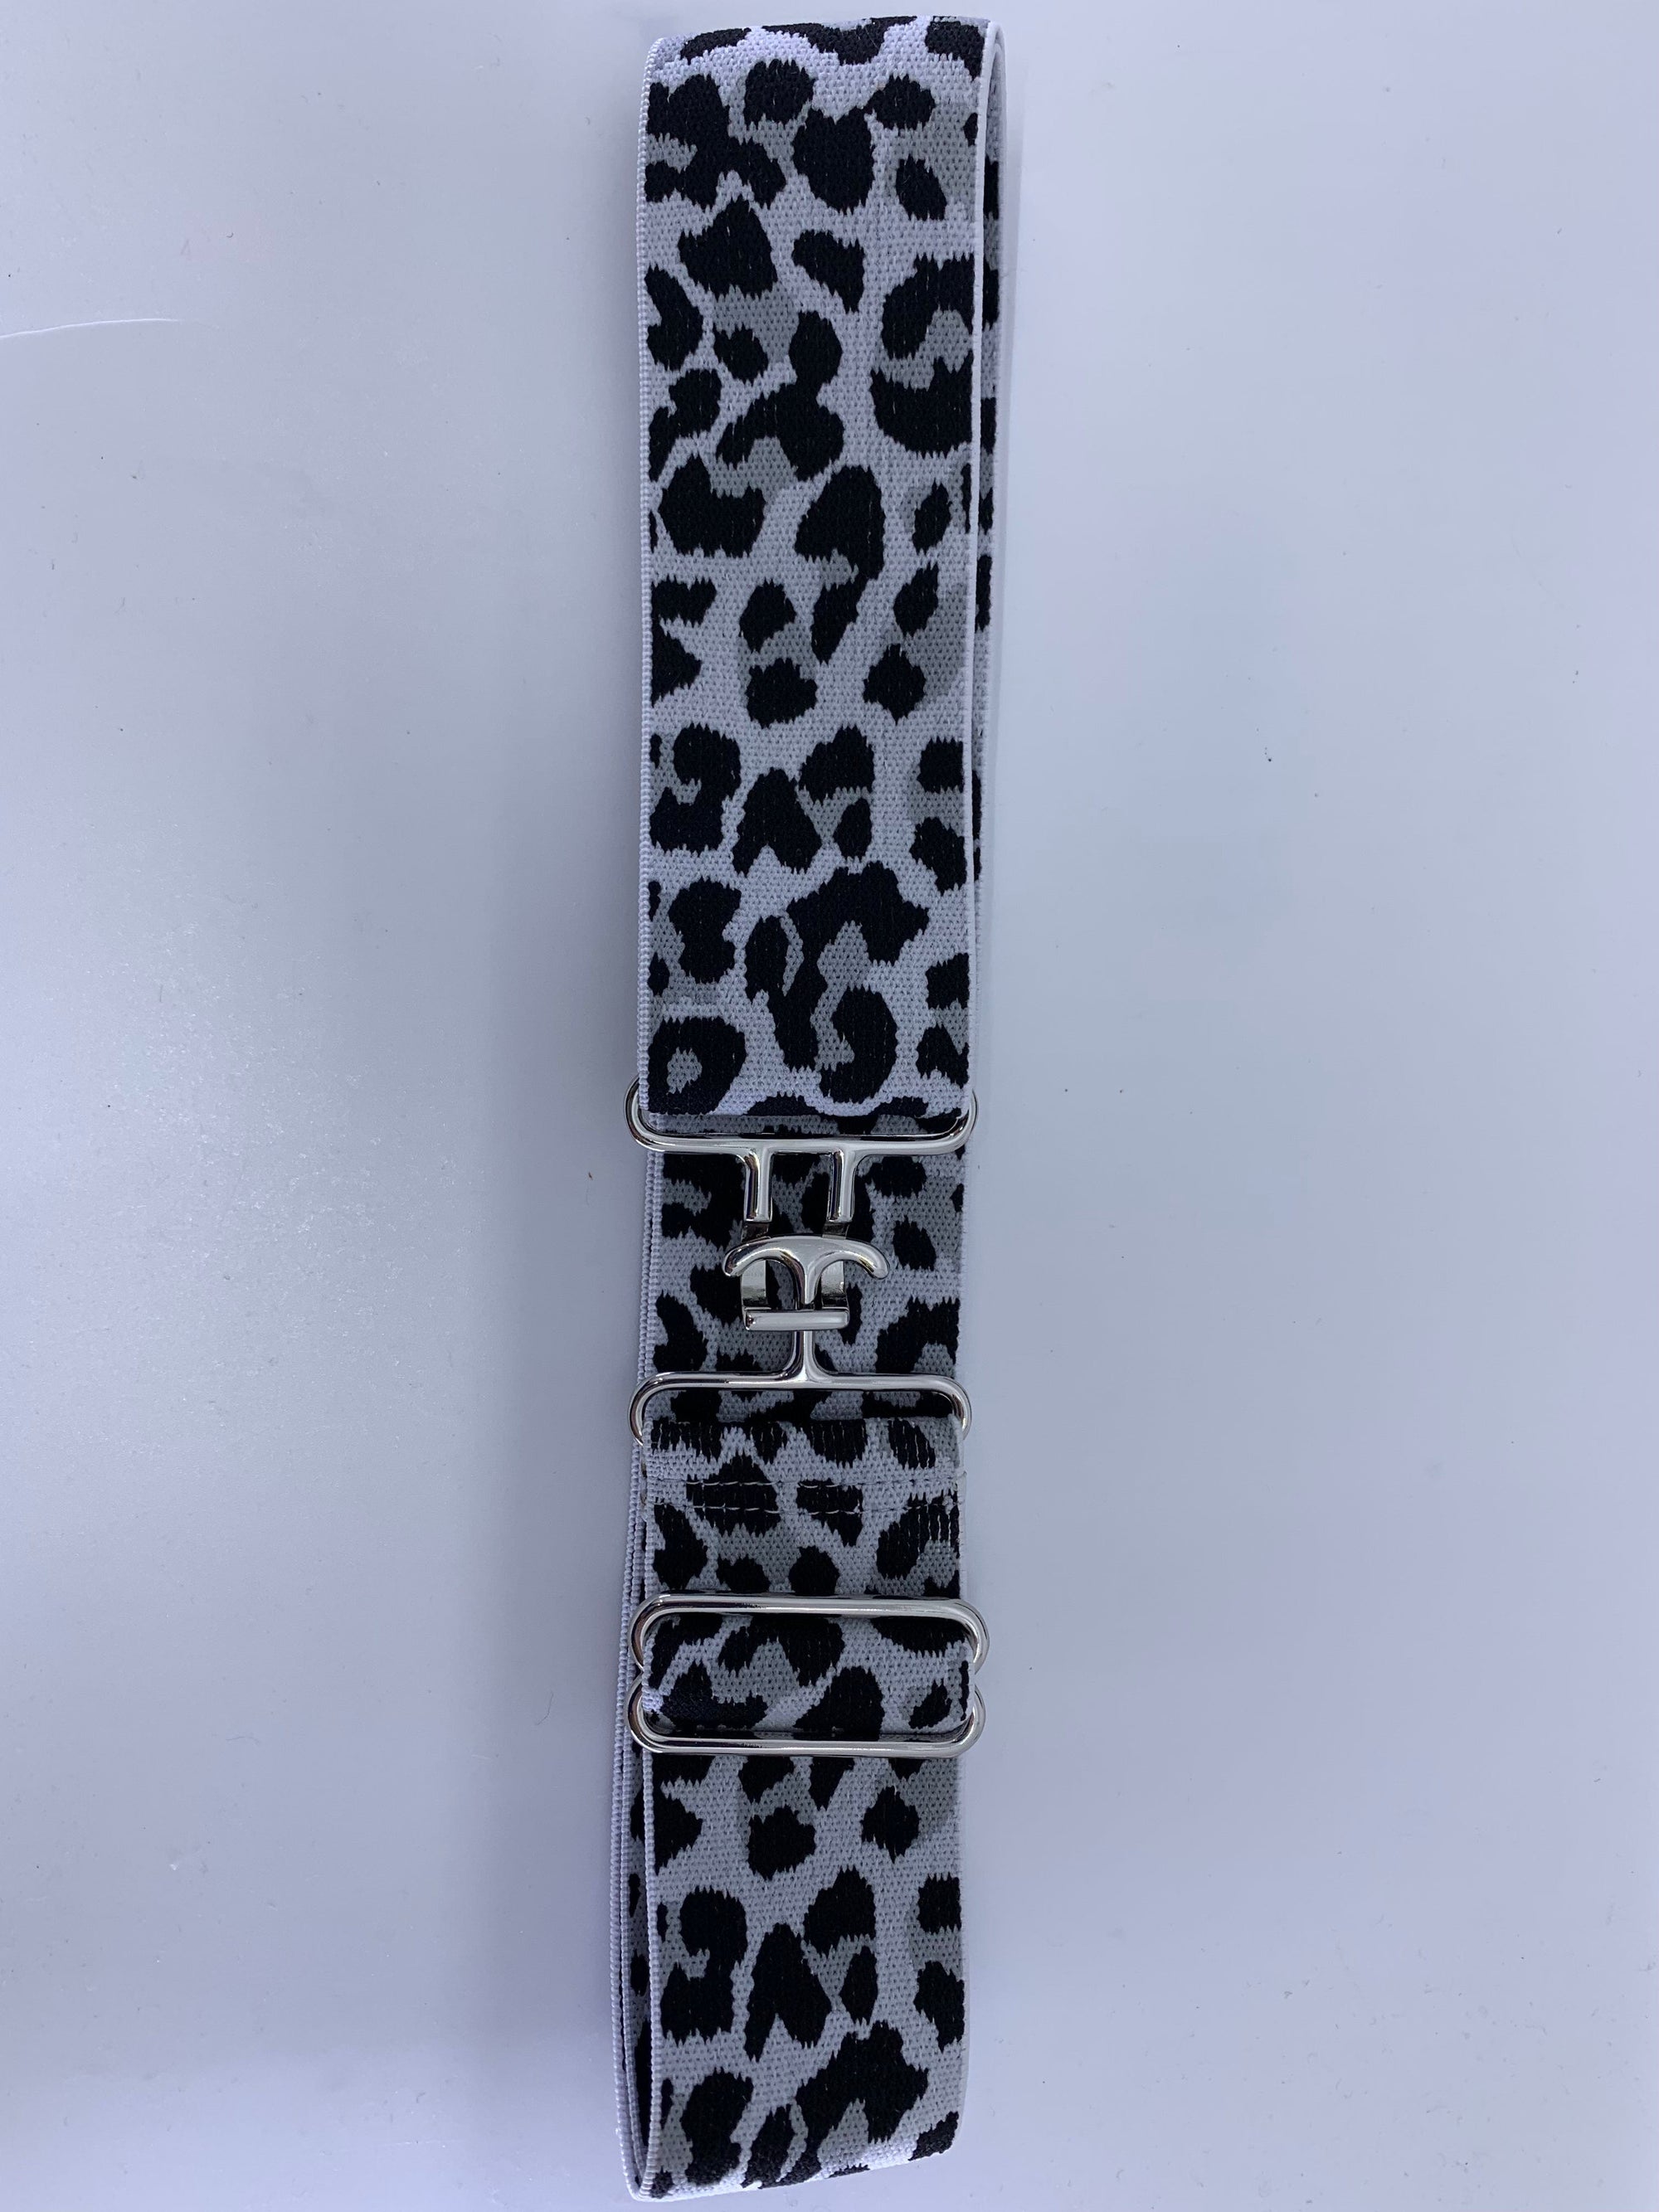 Pony Belts Co. Belt Stretch Belt 2" - Black/White Leopard equestrian team apparel online tack store mobile tack store custom farm apparel custom show stable clothing equestrian lifestyle horse show clothing riding clothes horses equestrian tack store